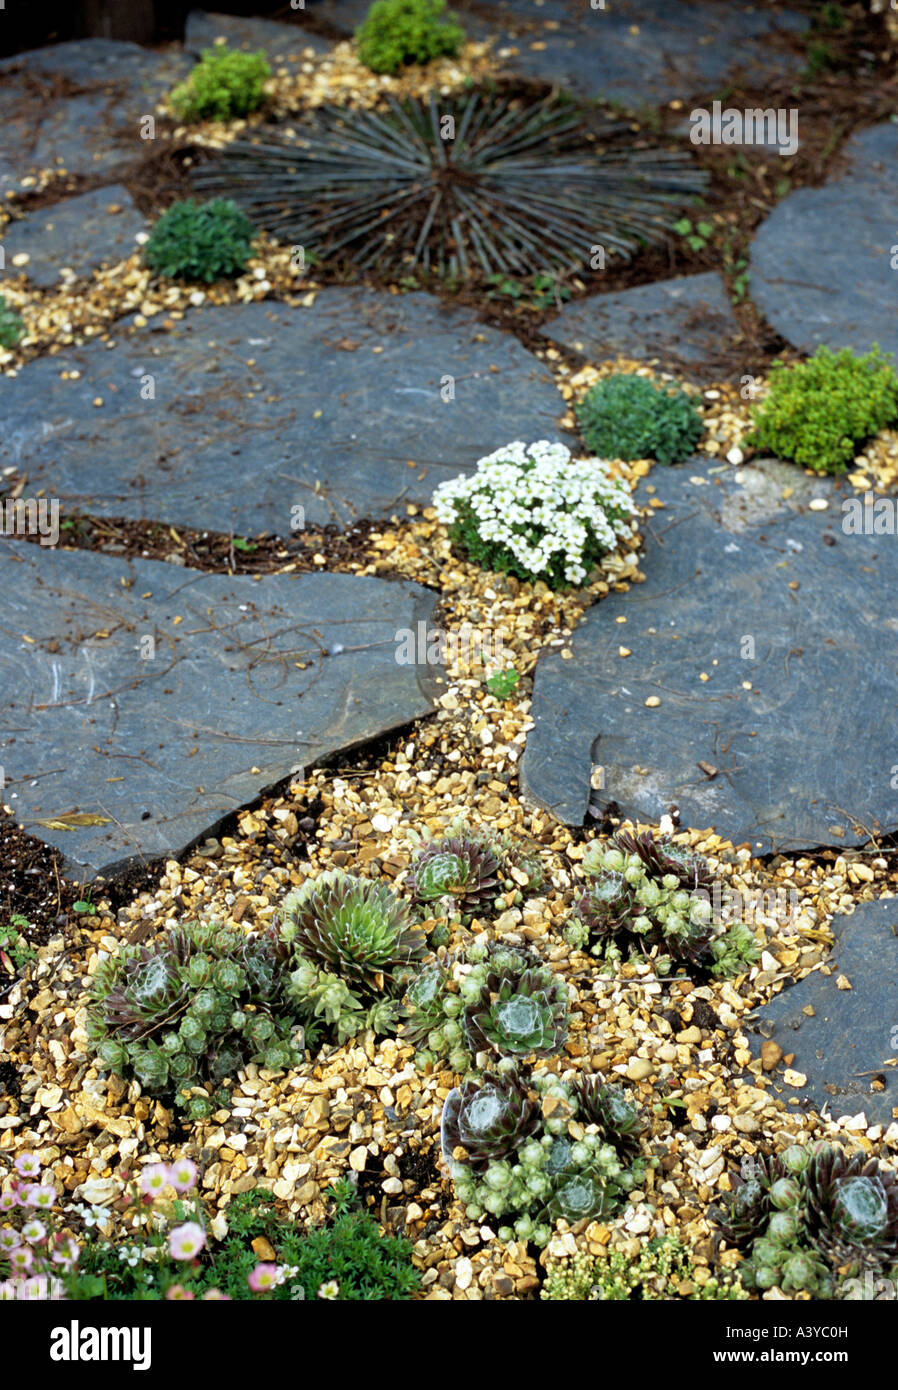 slate paving slabs, gravel, aeonium and alpines in a London garden Stock Photo